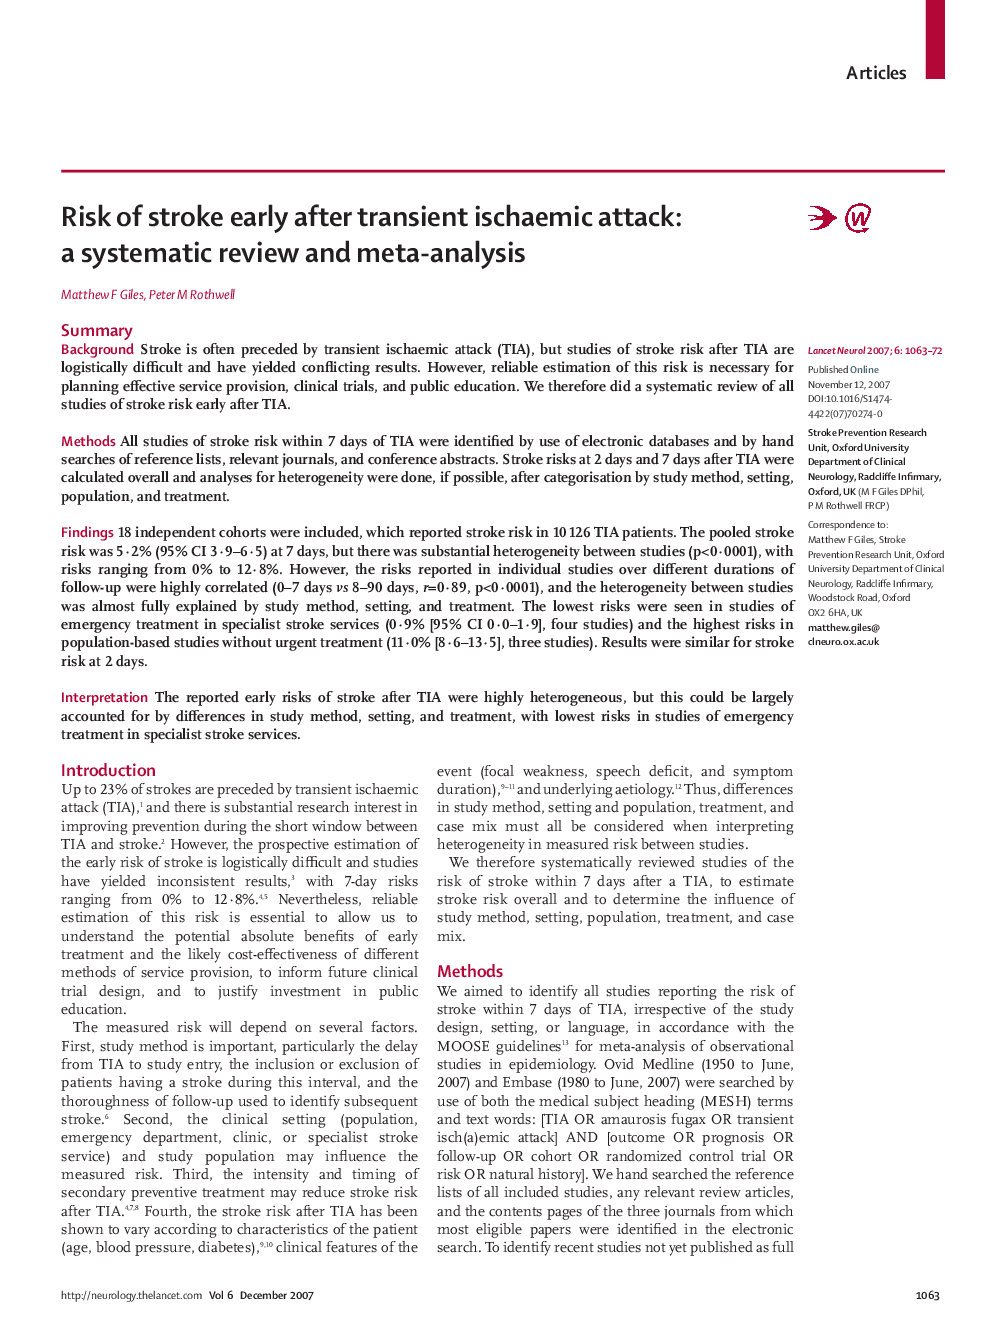 Risk of stroke early after transient ischaemic attack: a systematic review and meta-analysis